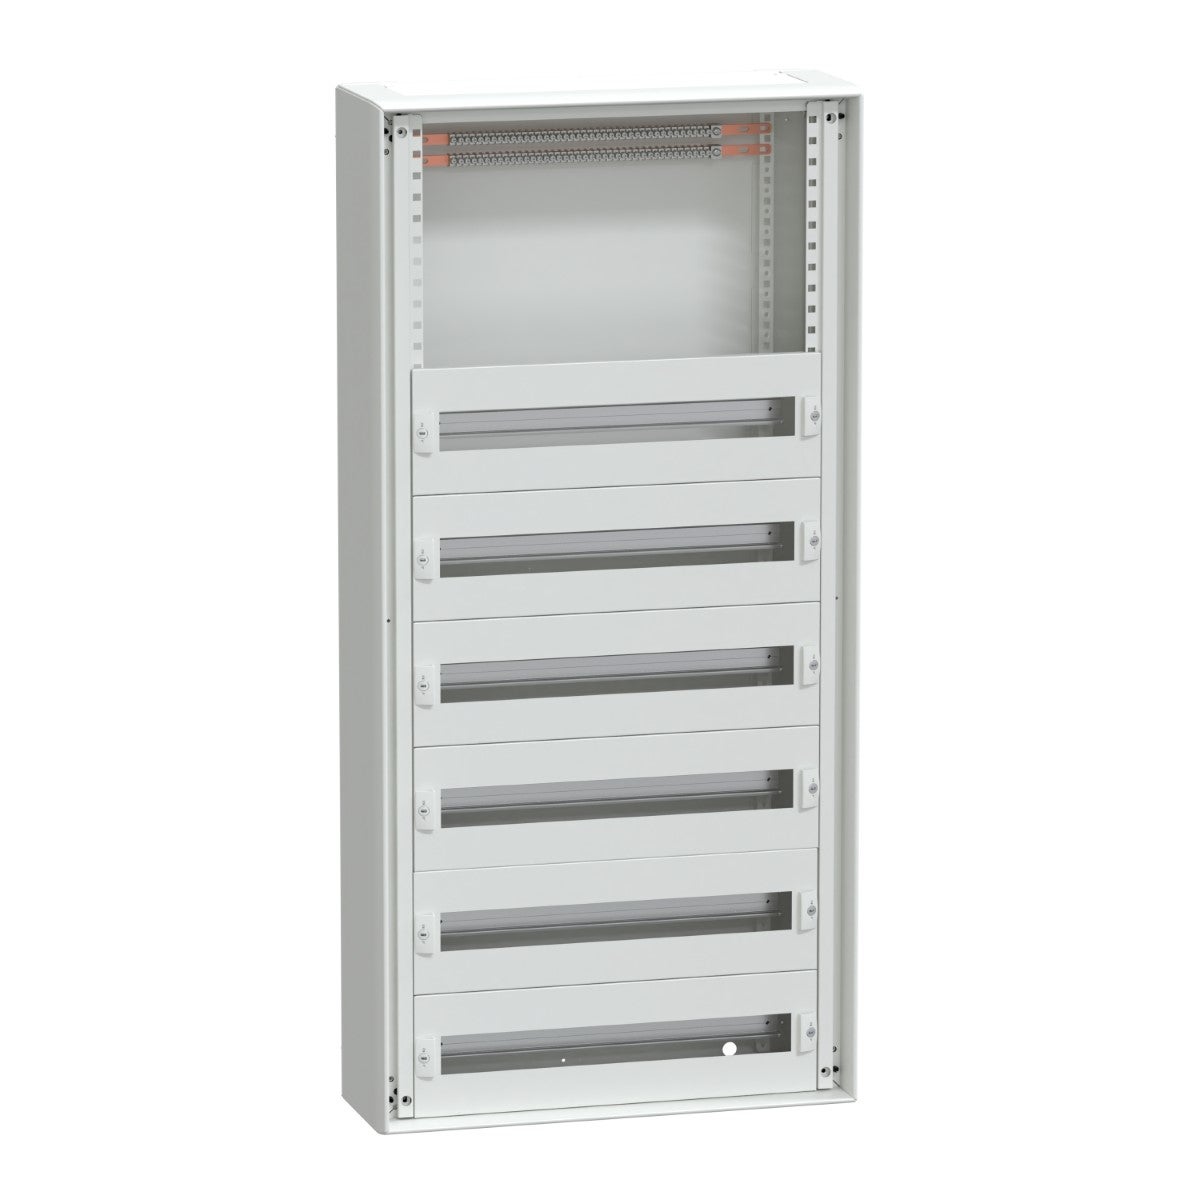 Enclosure, PrismaSeT G, for modular devices, wall mounted, W600mm, H1230mm (6R + incomer), IP30, with front plates, Pack 250